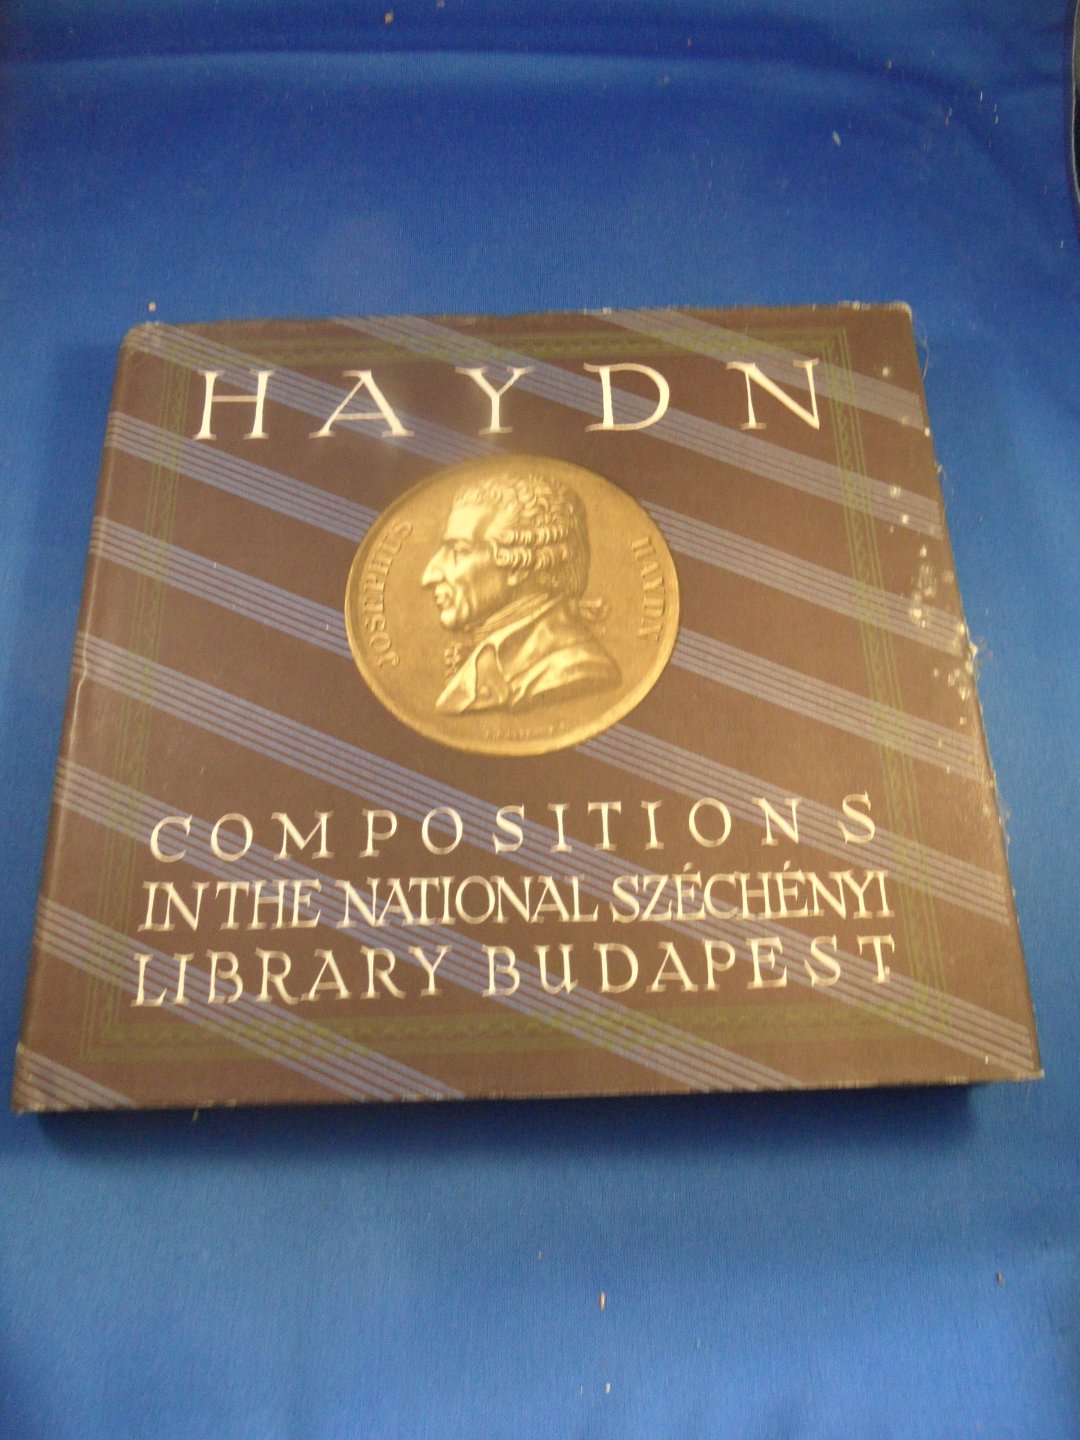 Vécsey, Jenö (ed) - Haydn compositions in the music collection of the National Széchényi library Budapest